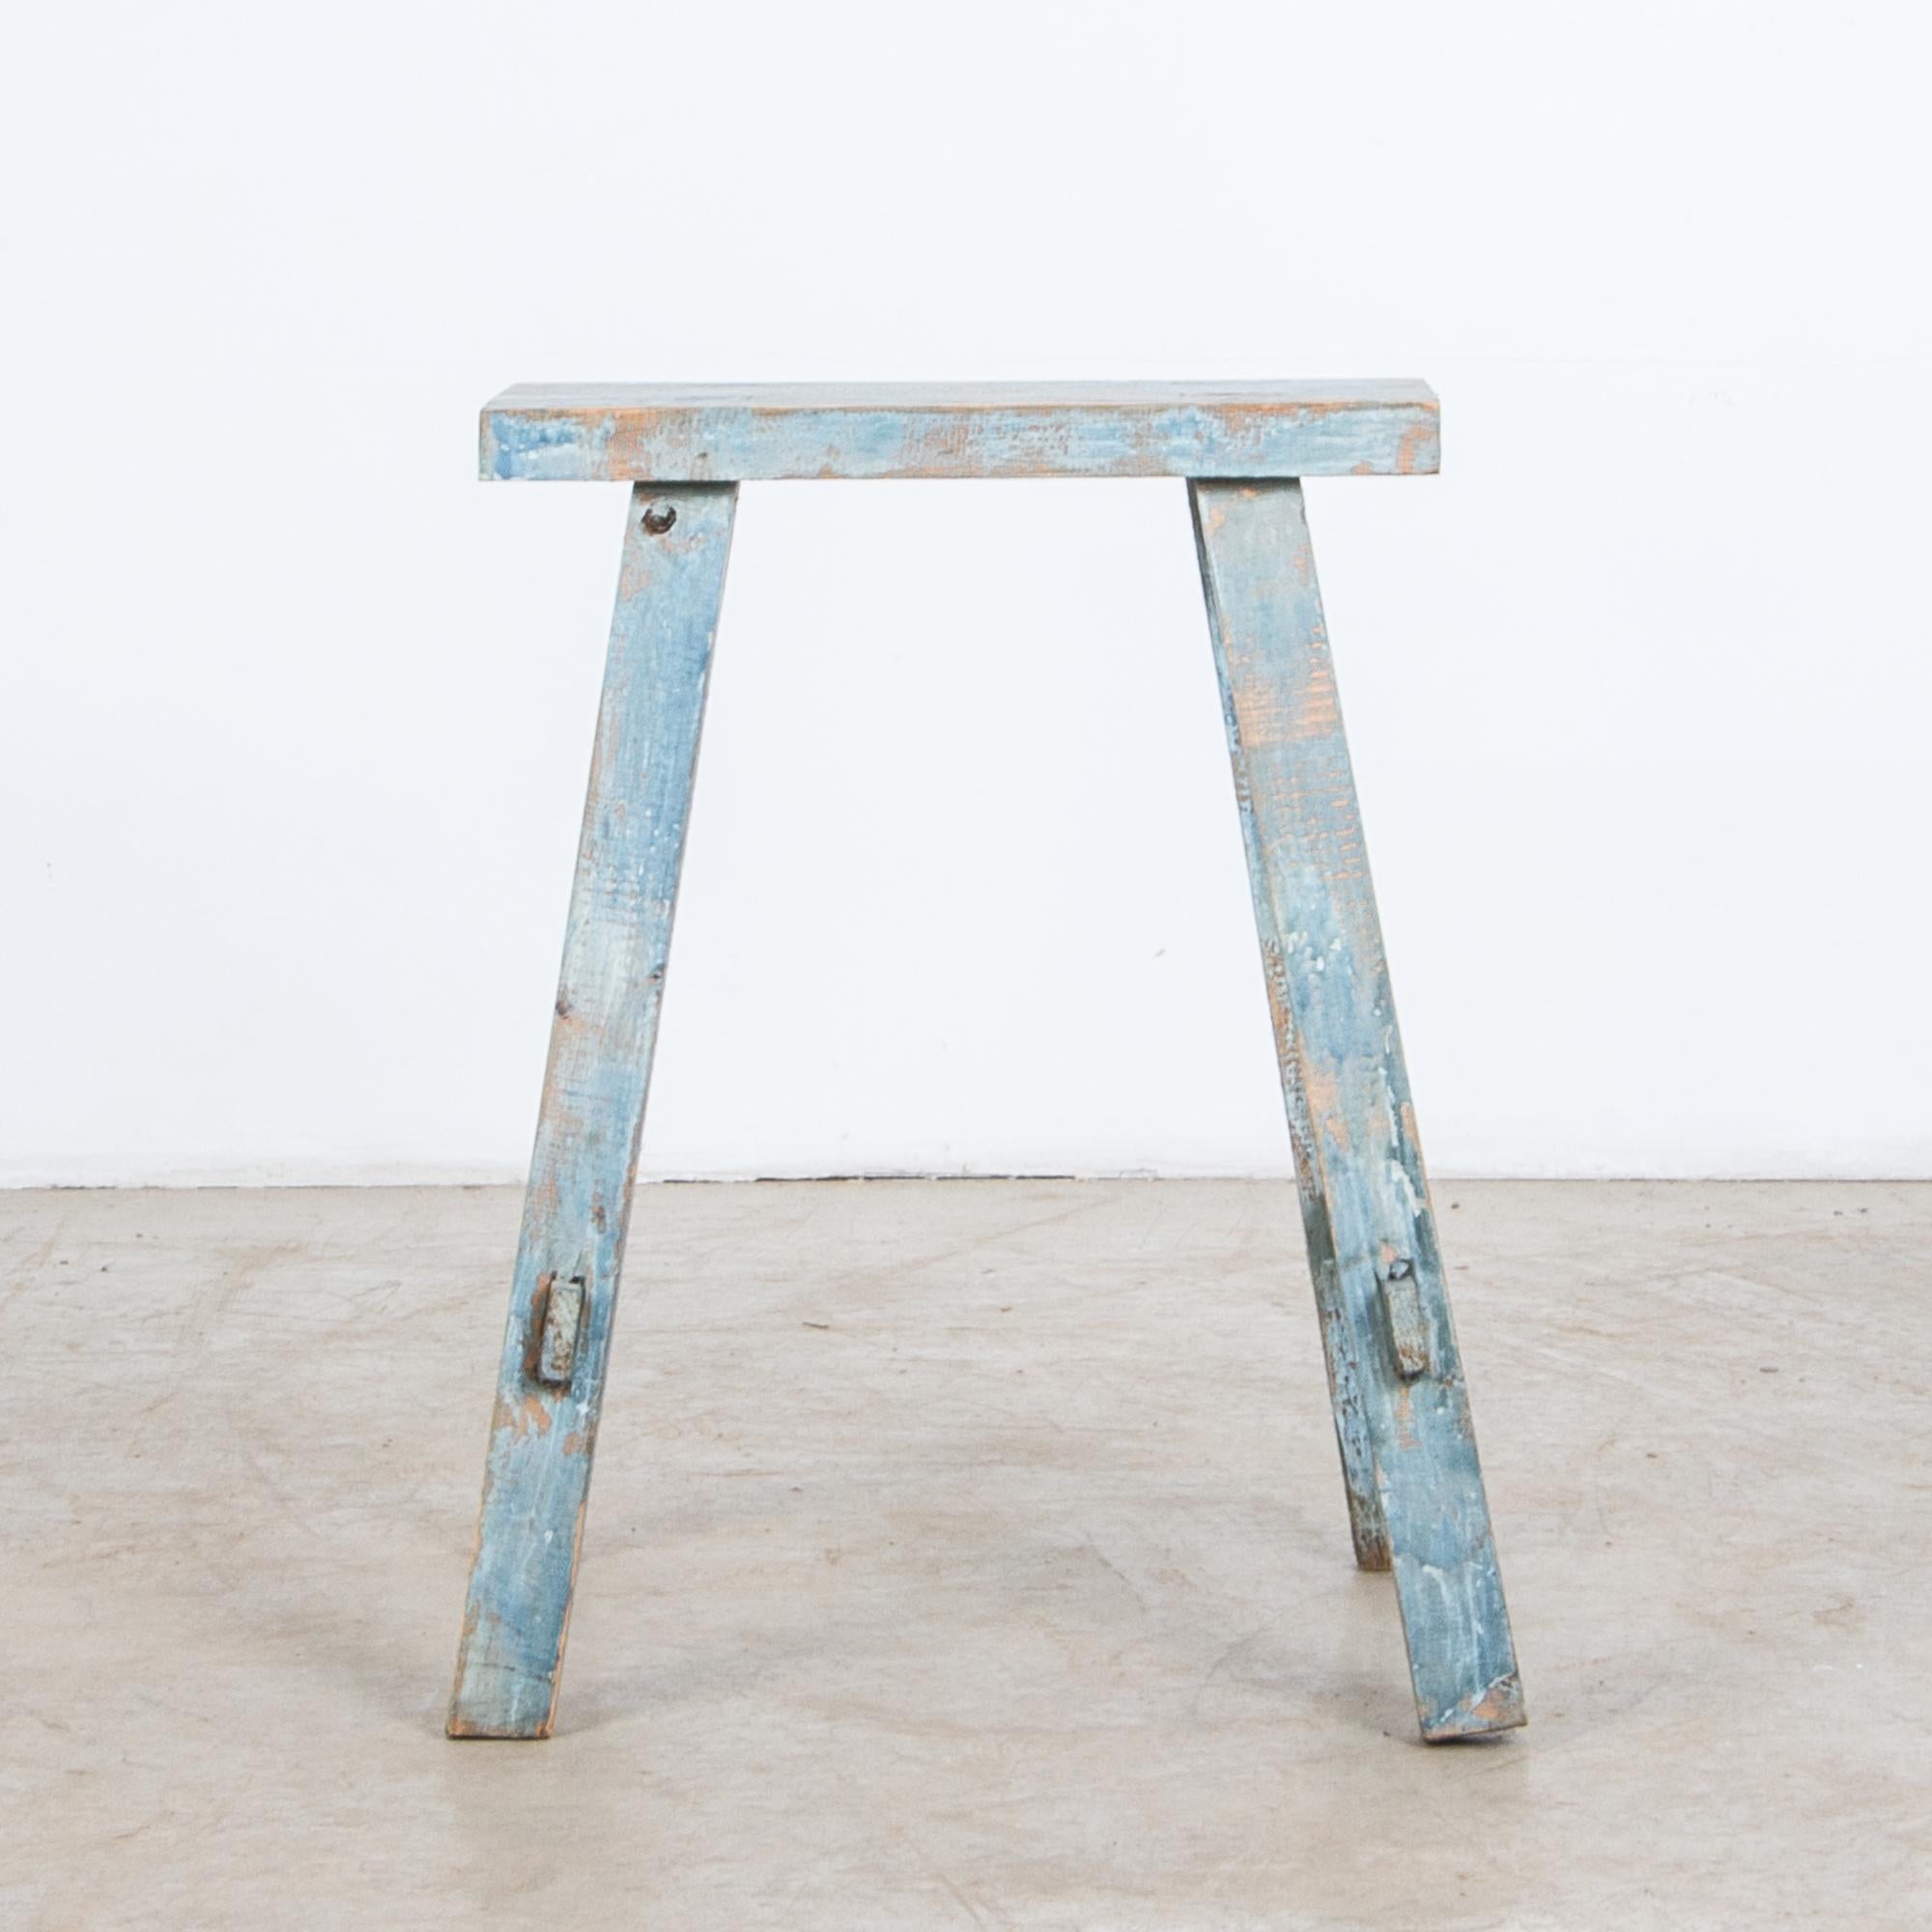 A rustic wooden stool painted in white and blue, a surprising color for this early 20th century wooden farm stool from France. The simplest place to rest your feet, a rustic and sturdy construction makes an understated accent.